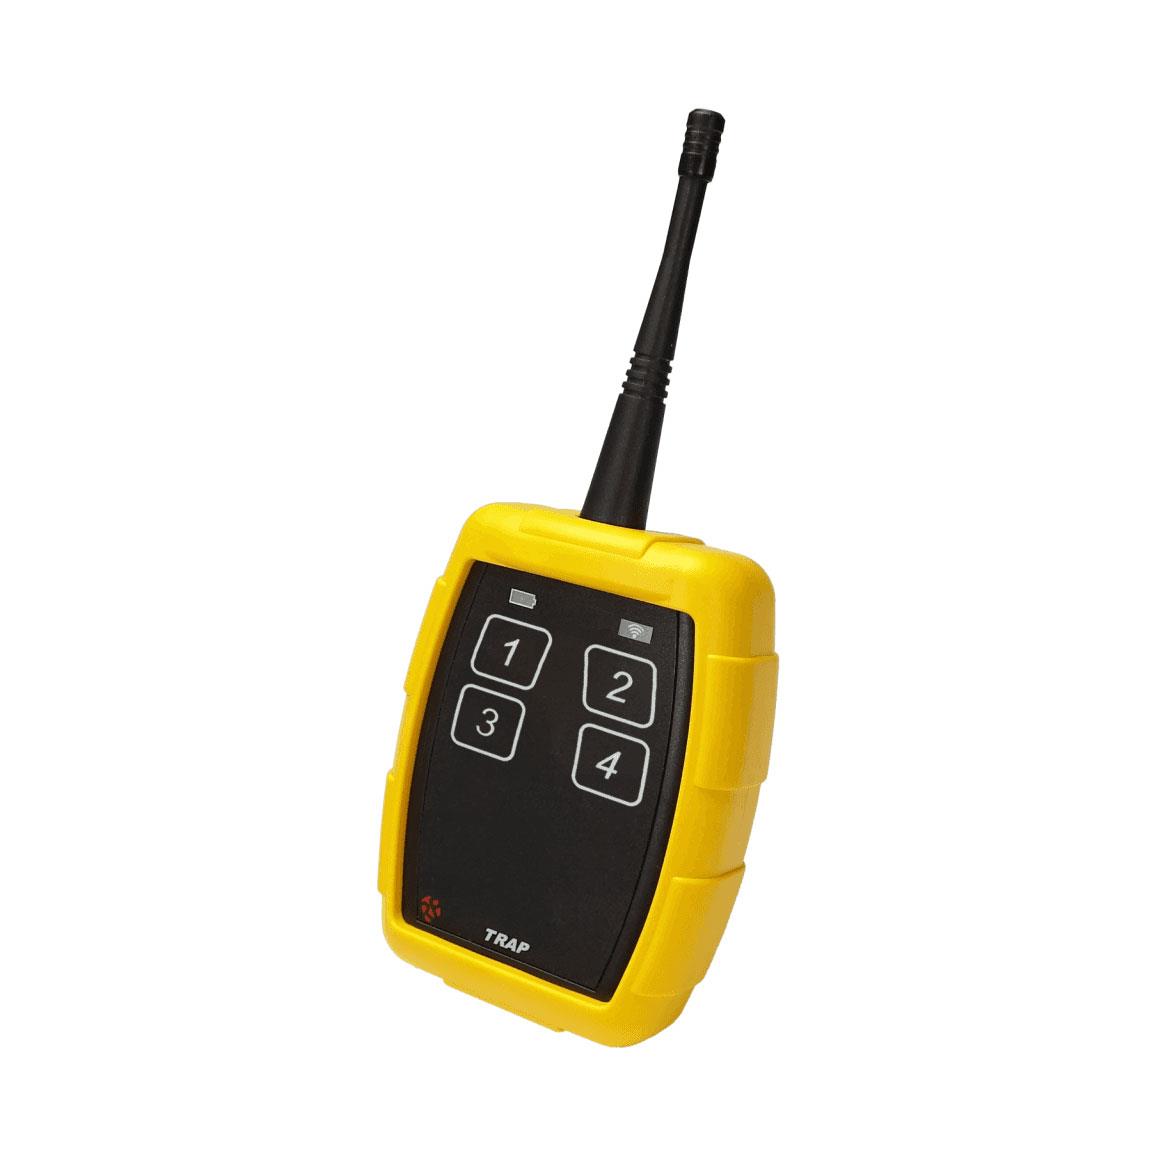 【TRAP-9T4】HAND HELD TRANSMITTER 4 SW 918MH